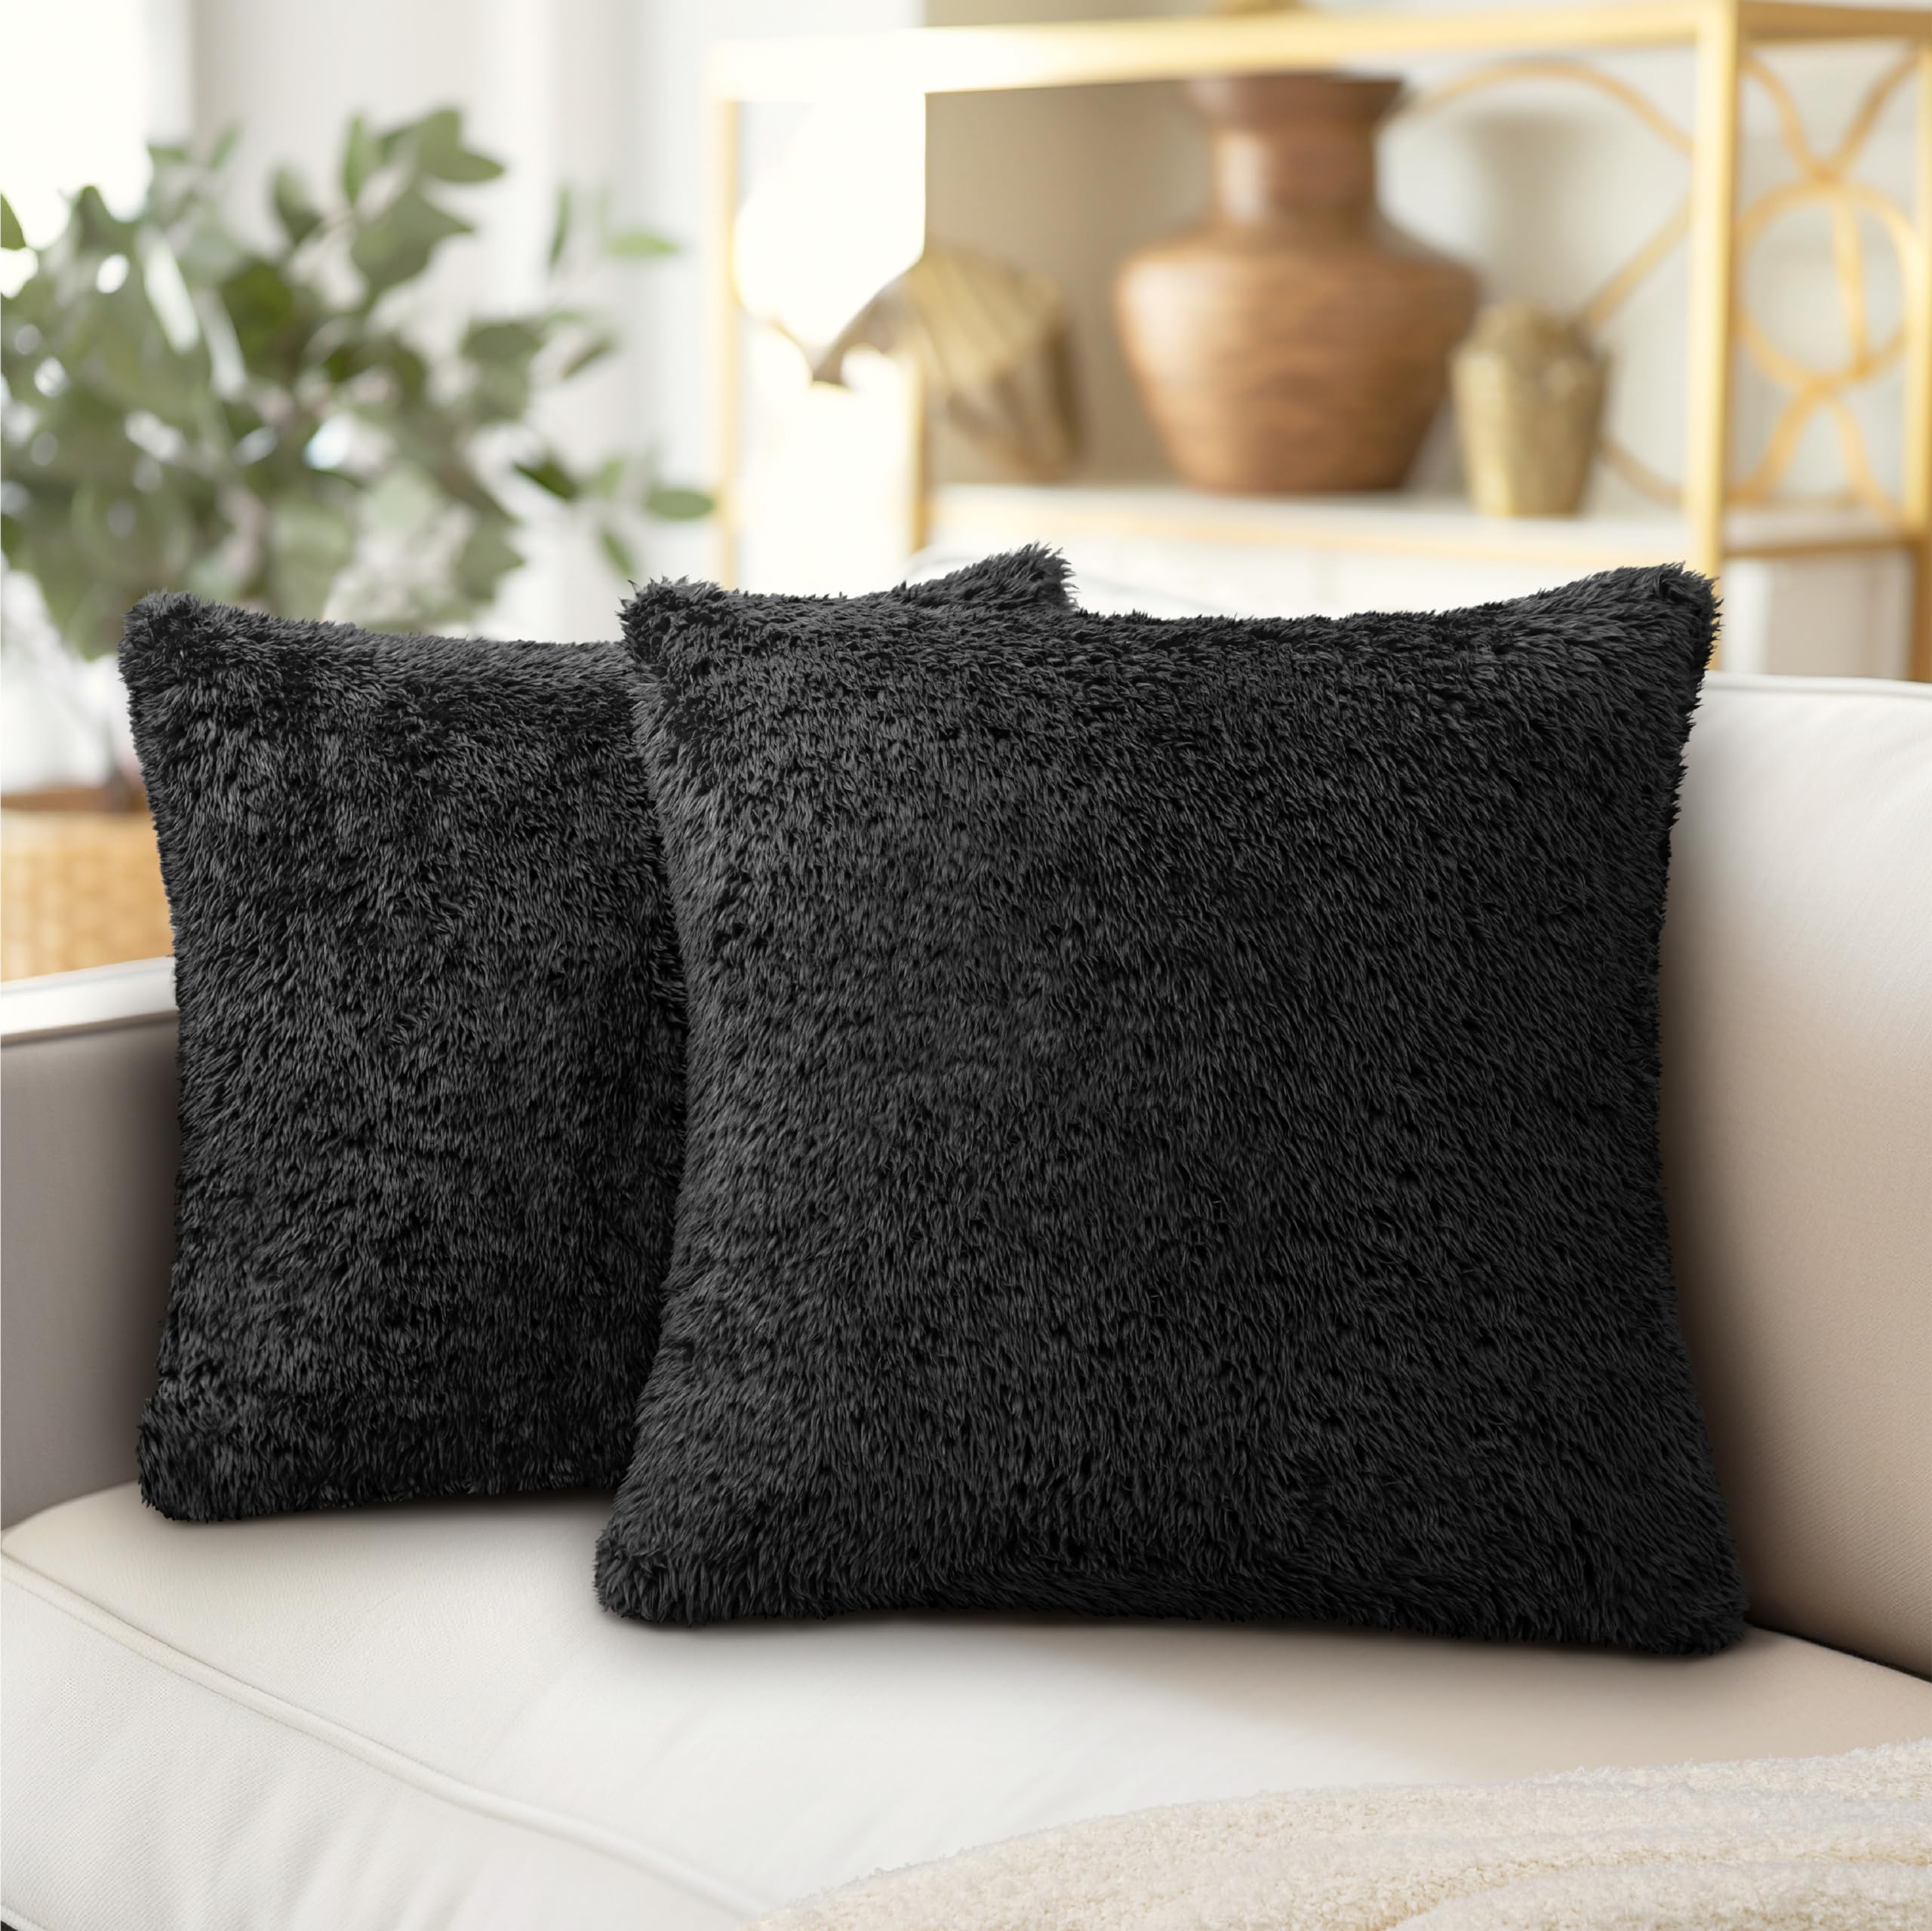 PAVILIA Fluffy Black Throw Pillow Covers, Decorative Accent Pillow Cases for Bed Sofa Couch, Soft Faux Fur Cushion Cover, Square